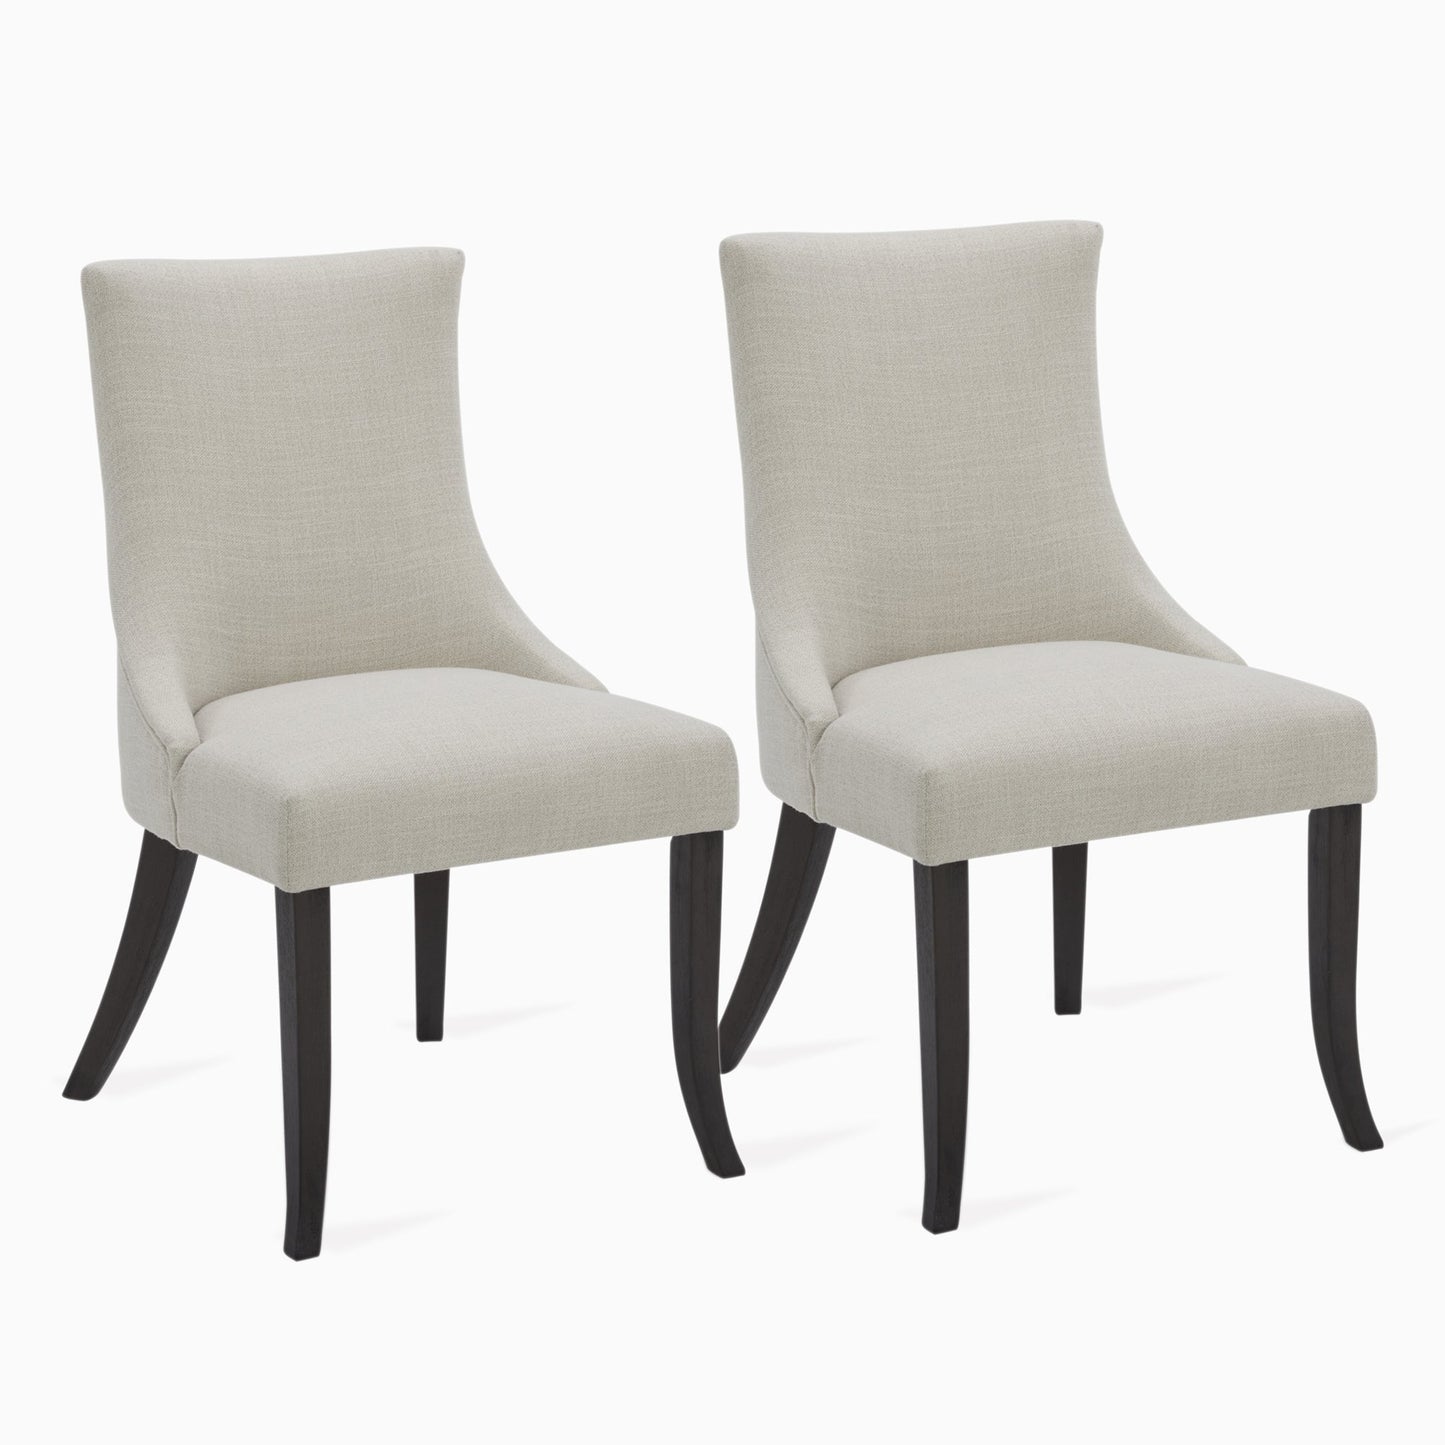 CHITA LIVING-Mia Romantic Dining Chair (Set of 2)-Dining Chairs-Performance Fabric-Linen-